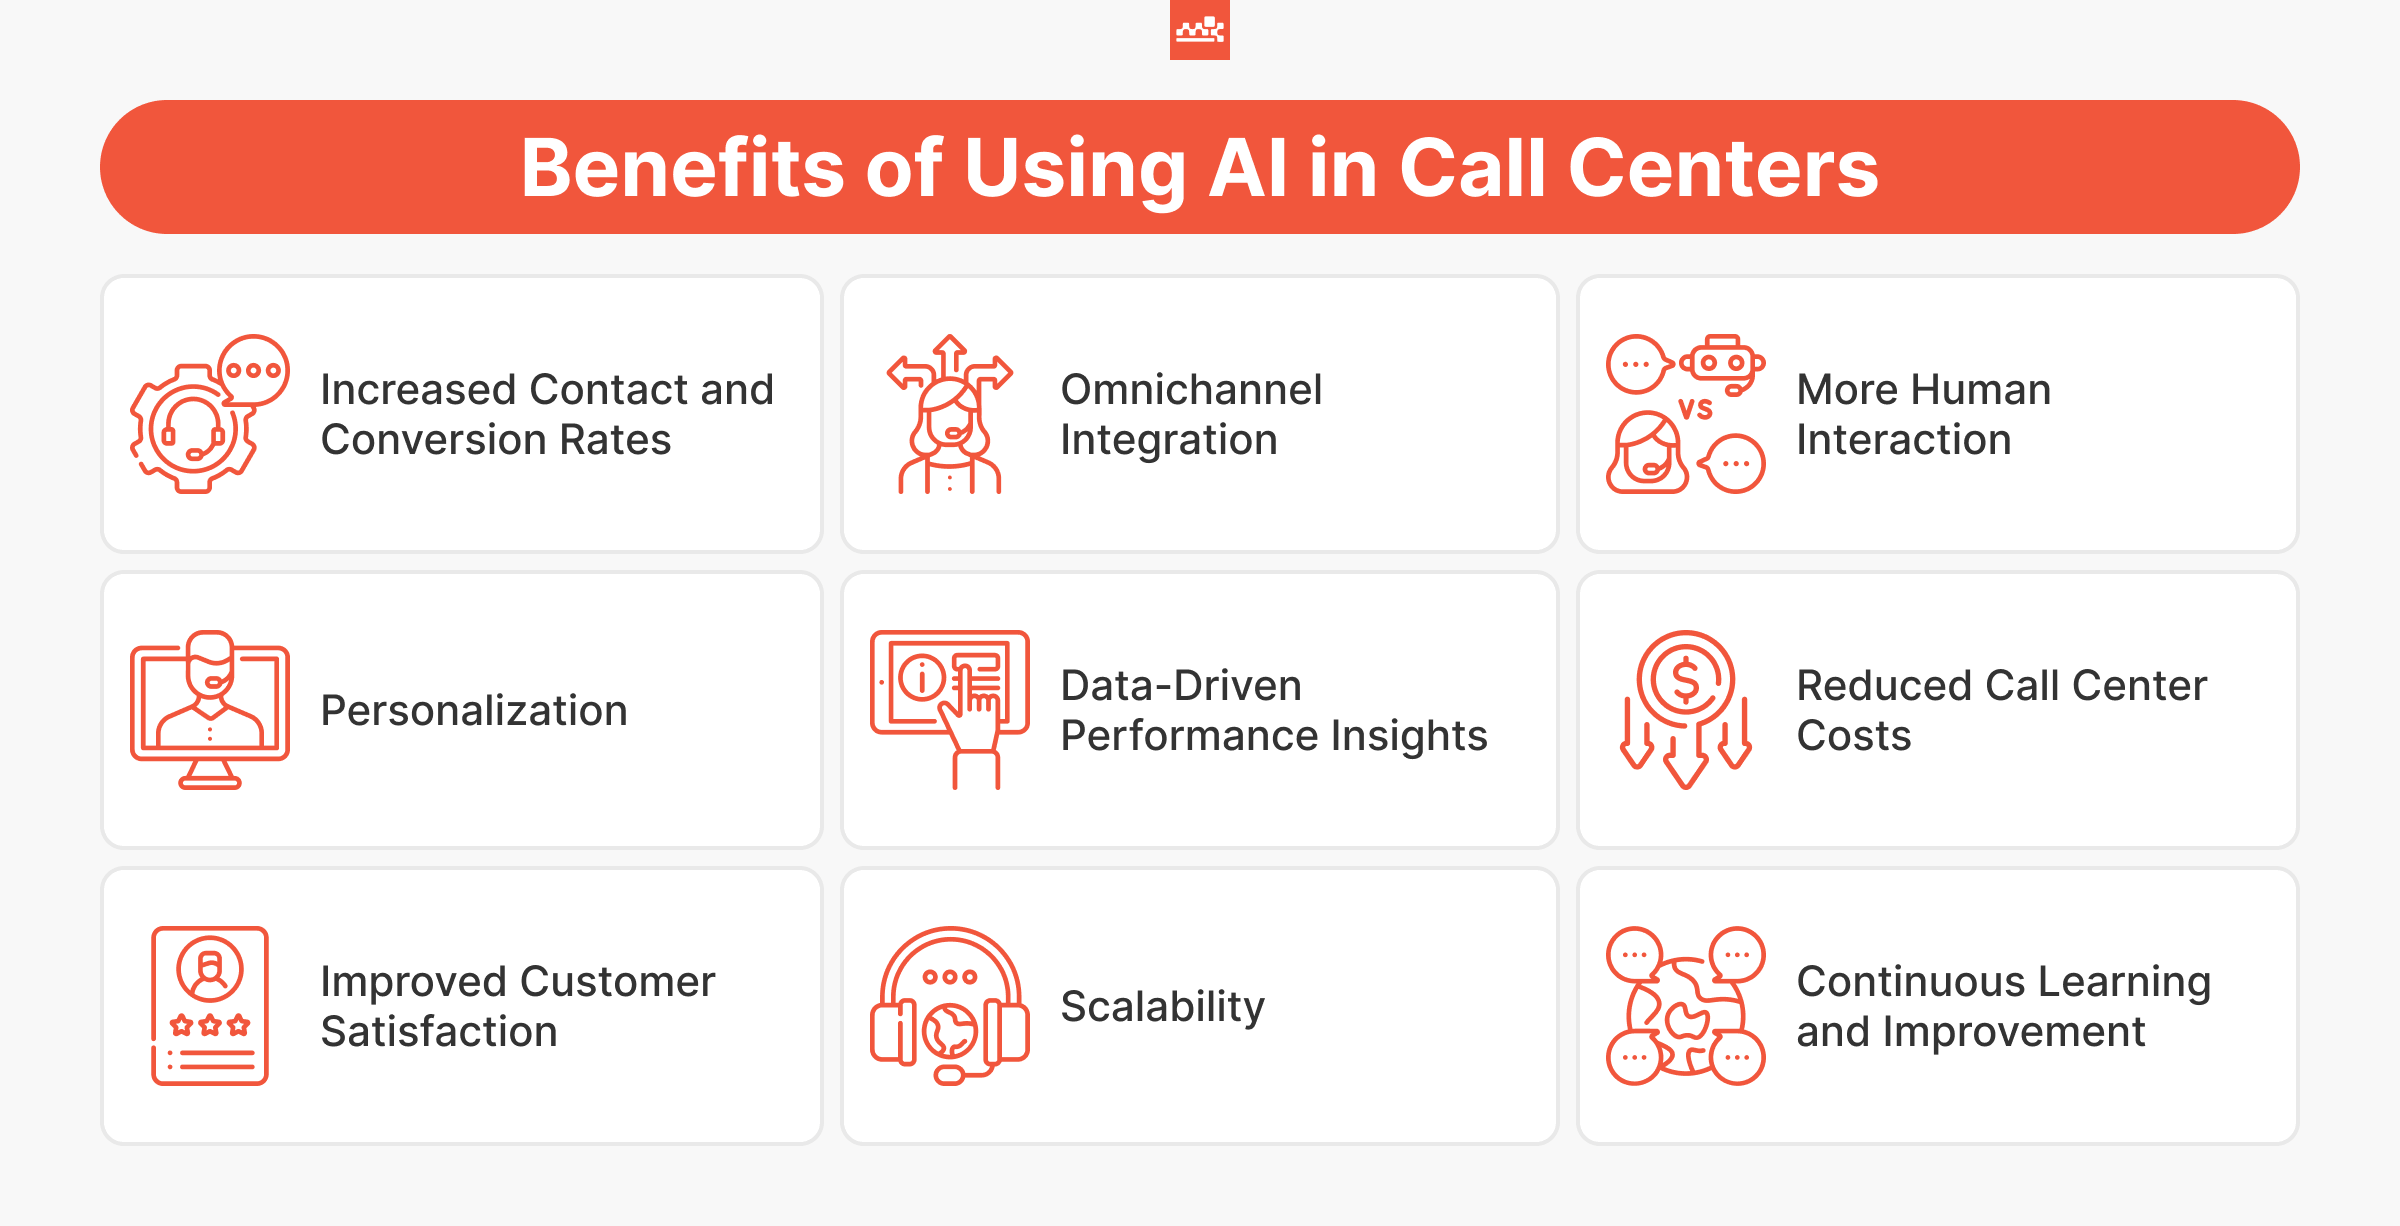 Advantages of Using AI in Call Centers